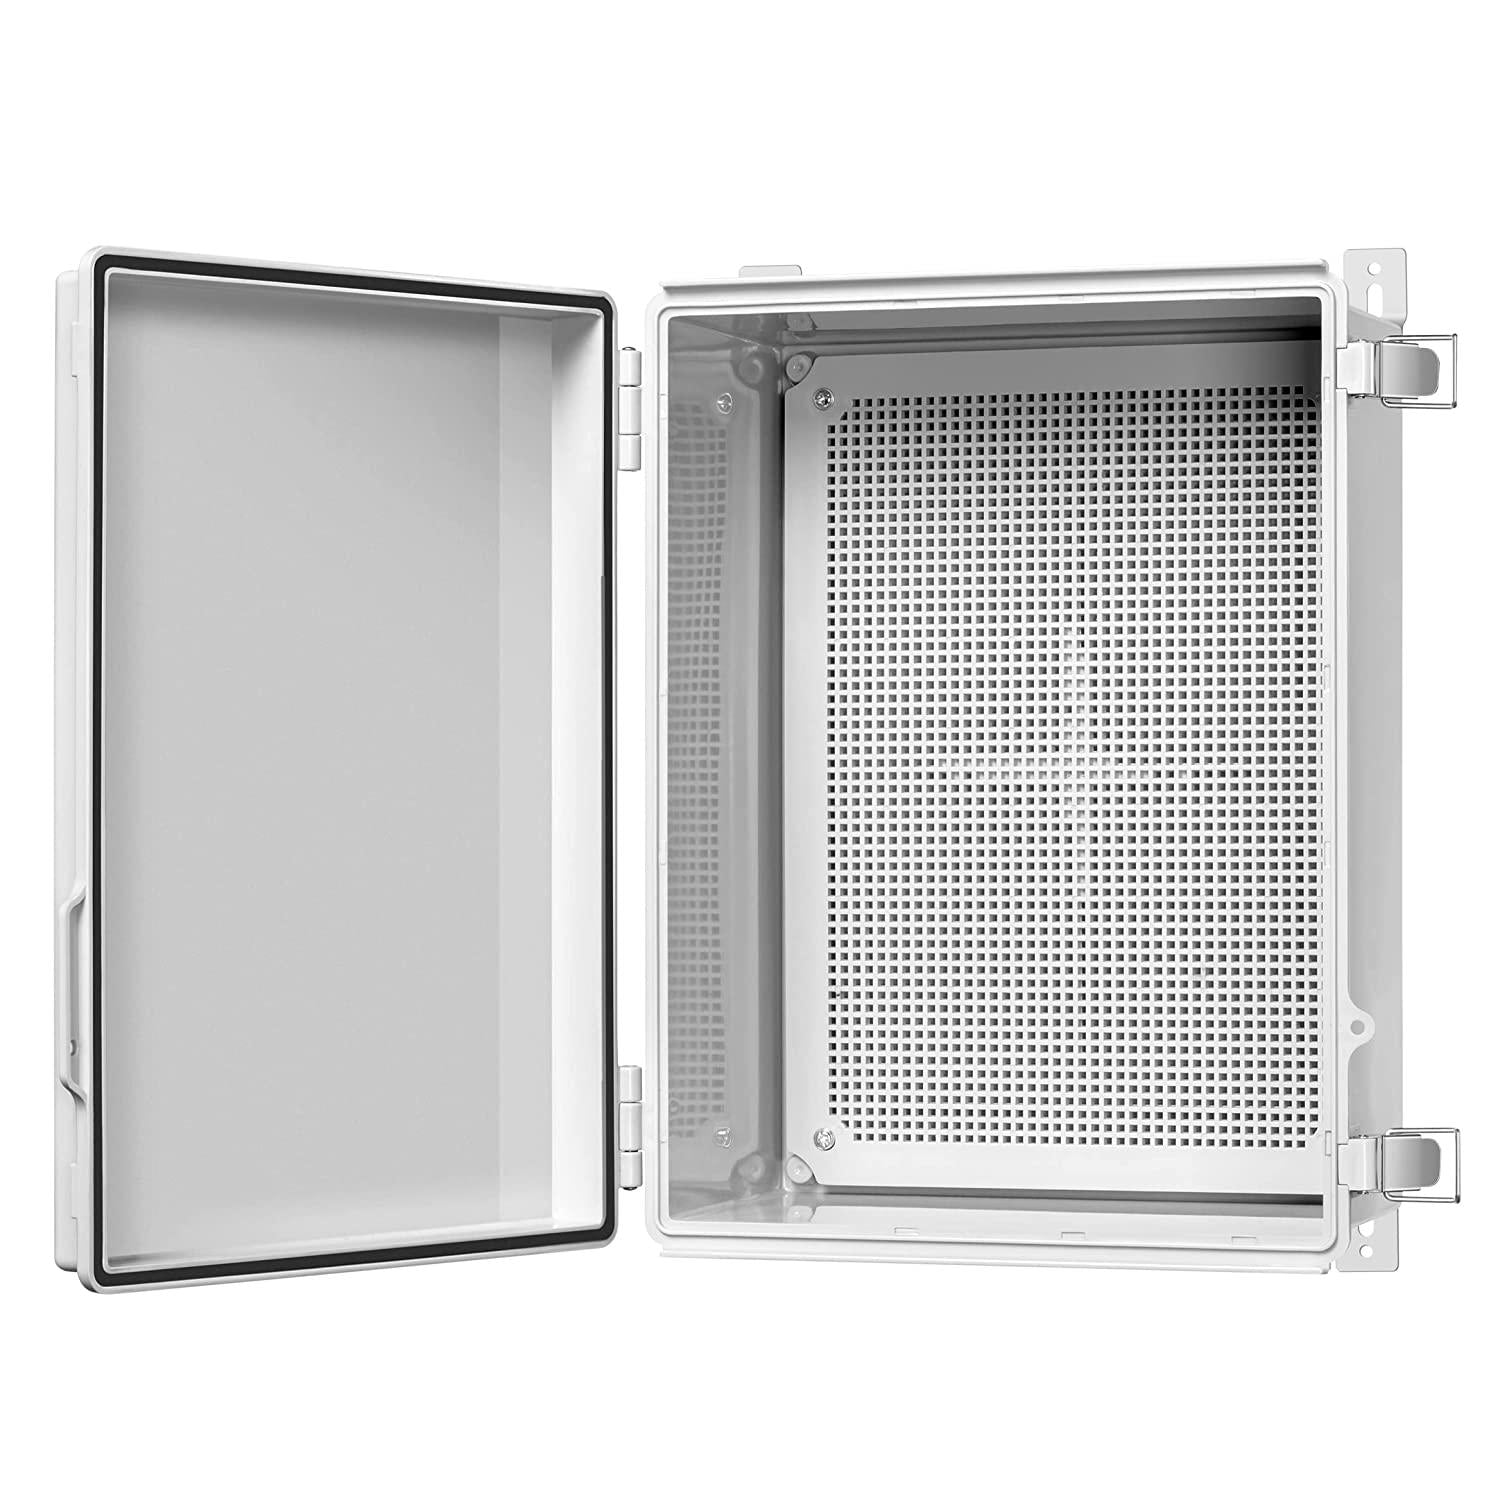 Gratury, Gratury Junction Box, Hinged Cover Stainless Steel Latch IP67 Waterproof Plastic Enclosure for Electrical Project with Mounting Plate and Wall Bracket 400×300×180mm (15.7 ×11.8 ×7.1 )